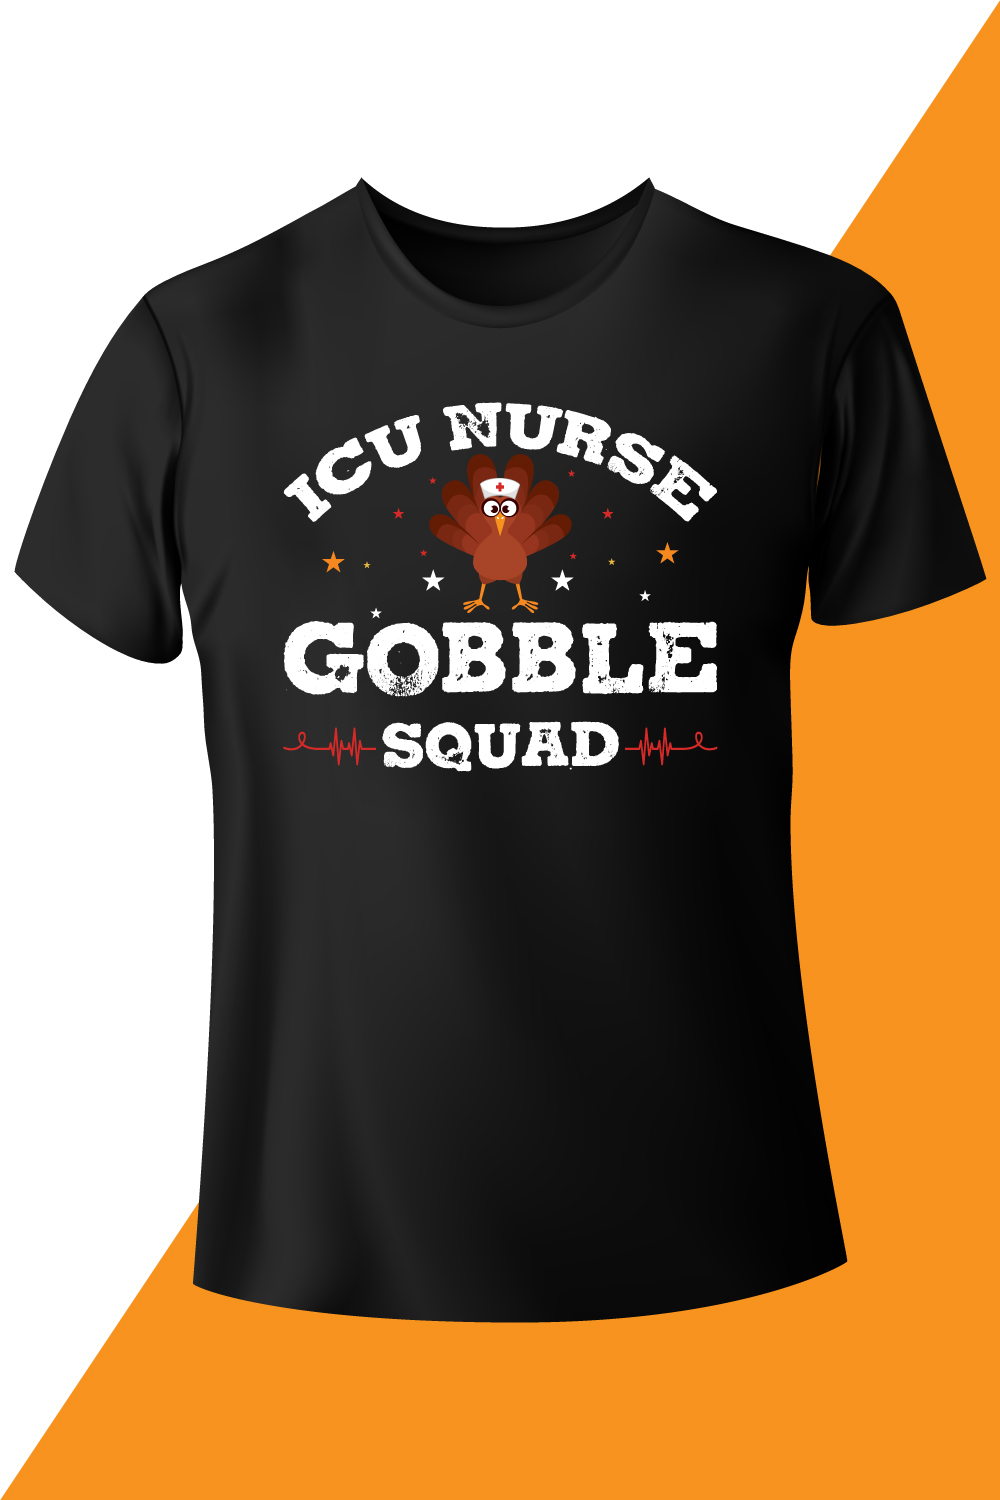 The image of a black T-shirt with a charming inscription Icu nurse gobble squad.